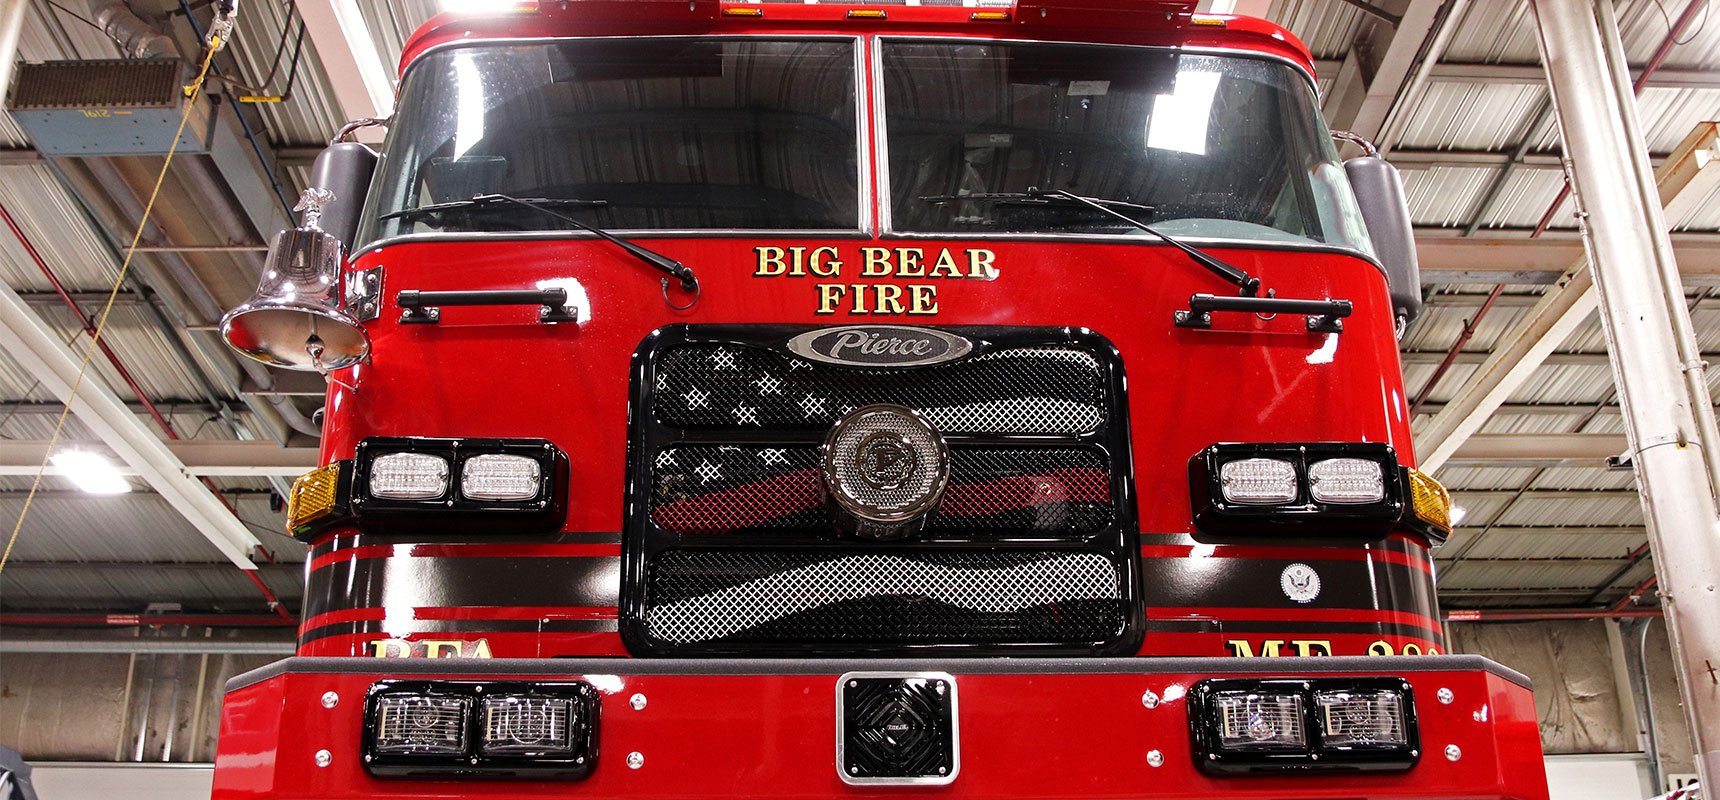 Big Bear Fire Department has three new fire apparatus in production at Pierce Manufacturing